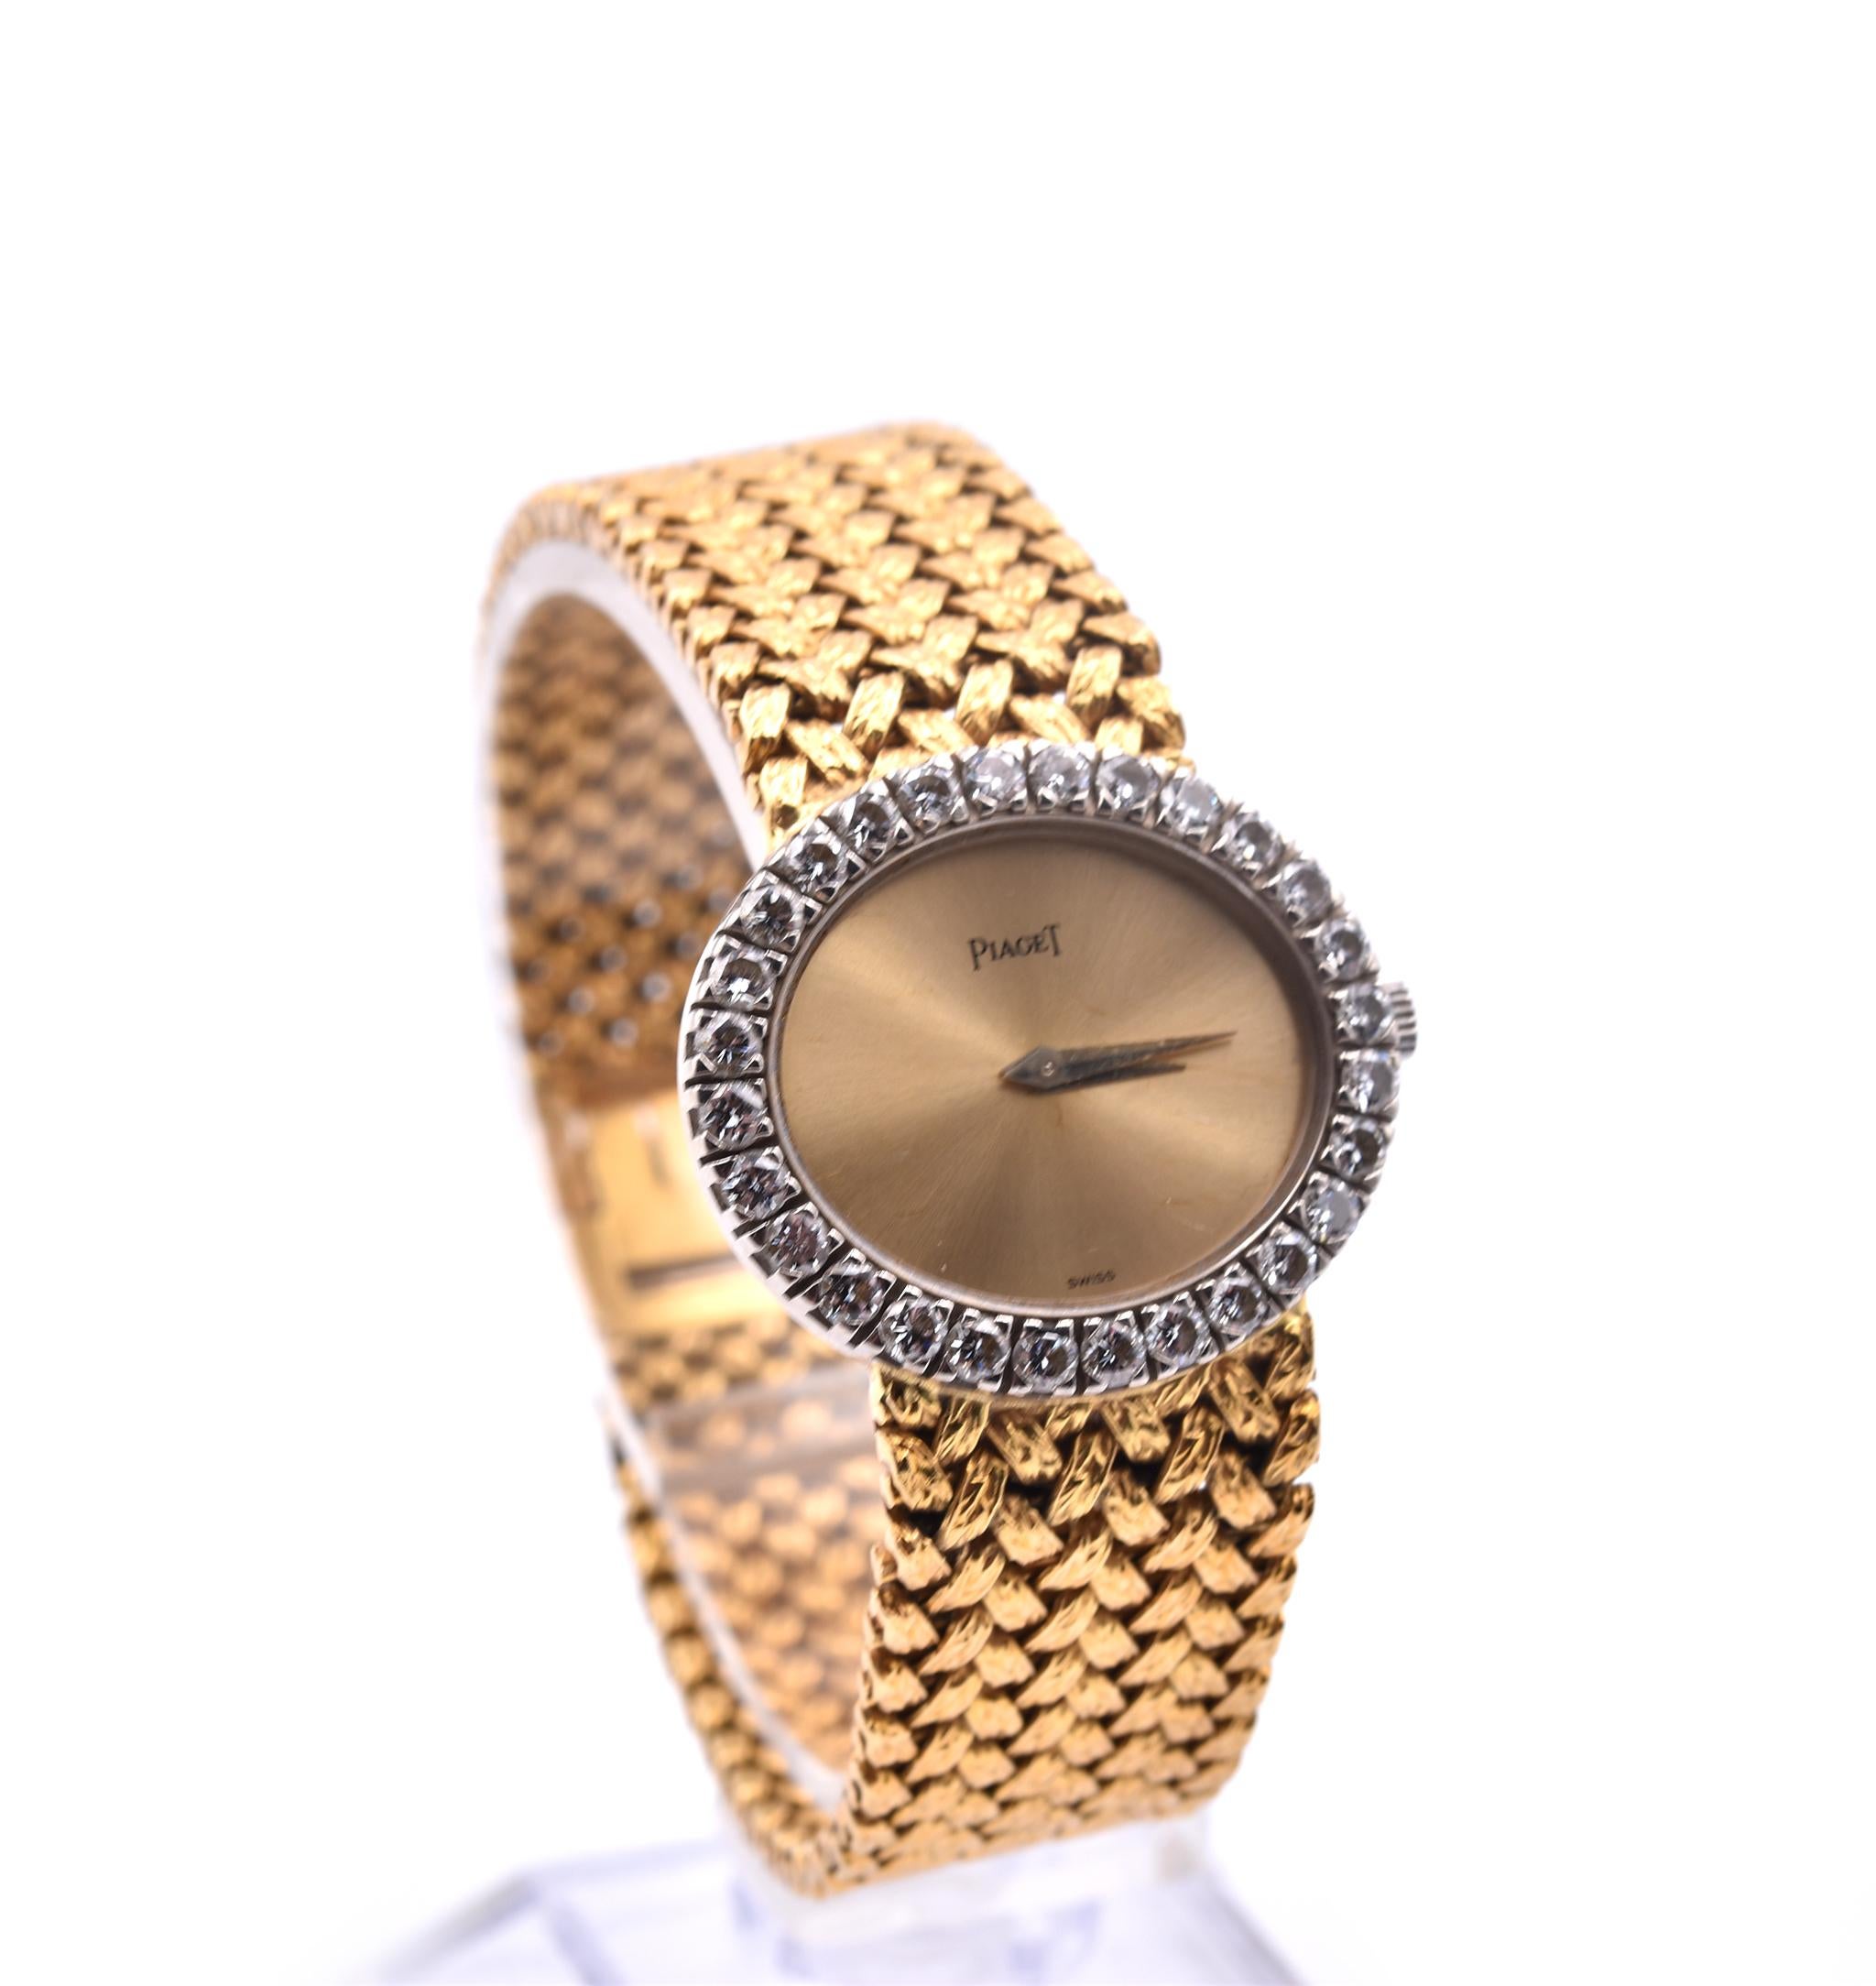 Movement: manual
Function: hours, minutes
Case: 28mm by 24mm oval 18k yellow gold case, sapphire crystal
Band: 18k yellow gold bracelet will fit a 6.5-inch wrist 
Dial: gold dial, gold hands
Bezel: 28 Diamonds = 1.00cttw
Serial: 353XXX
Reference#: